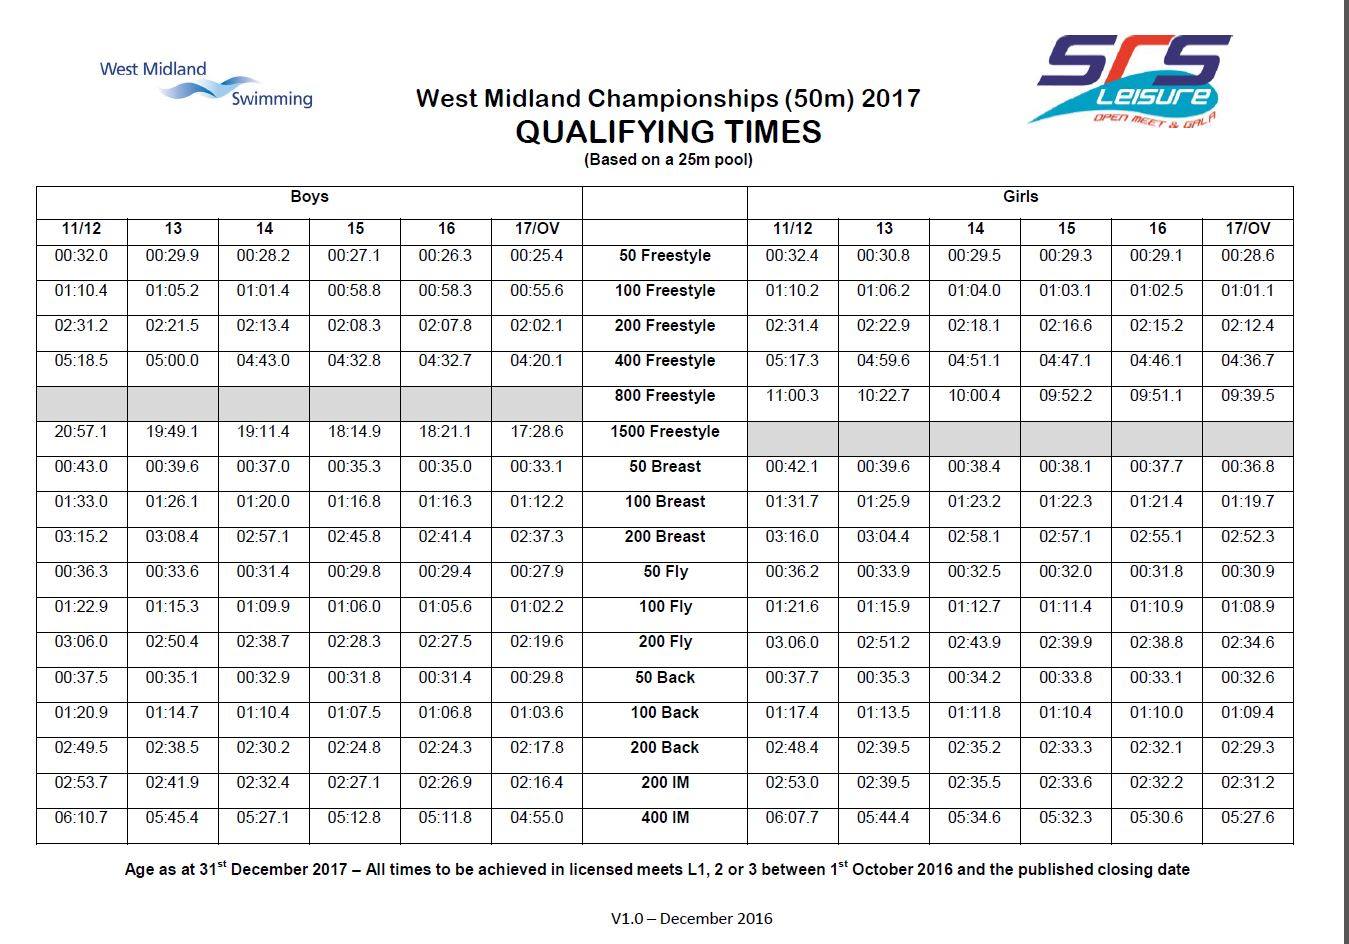 West Midlands Championships Qualifying Times for 2017 Released